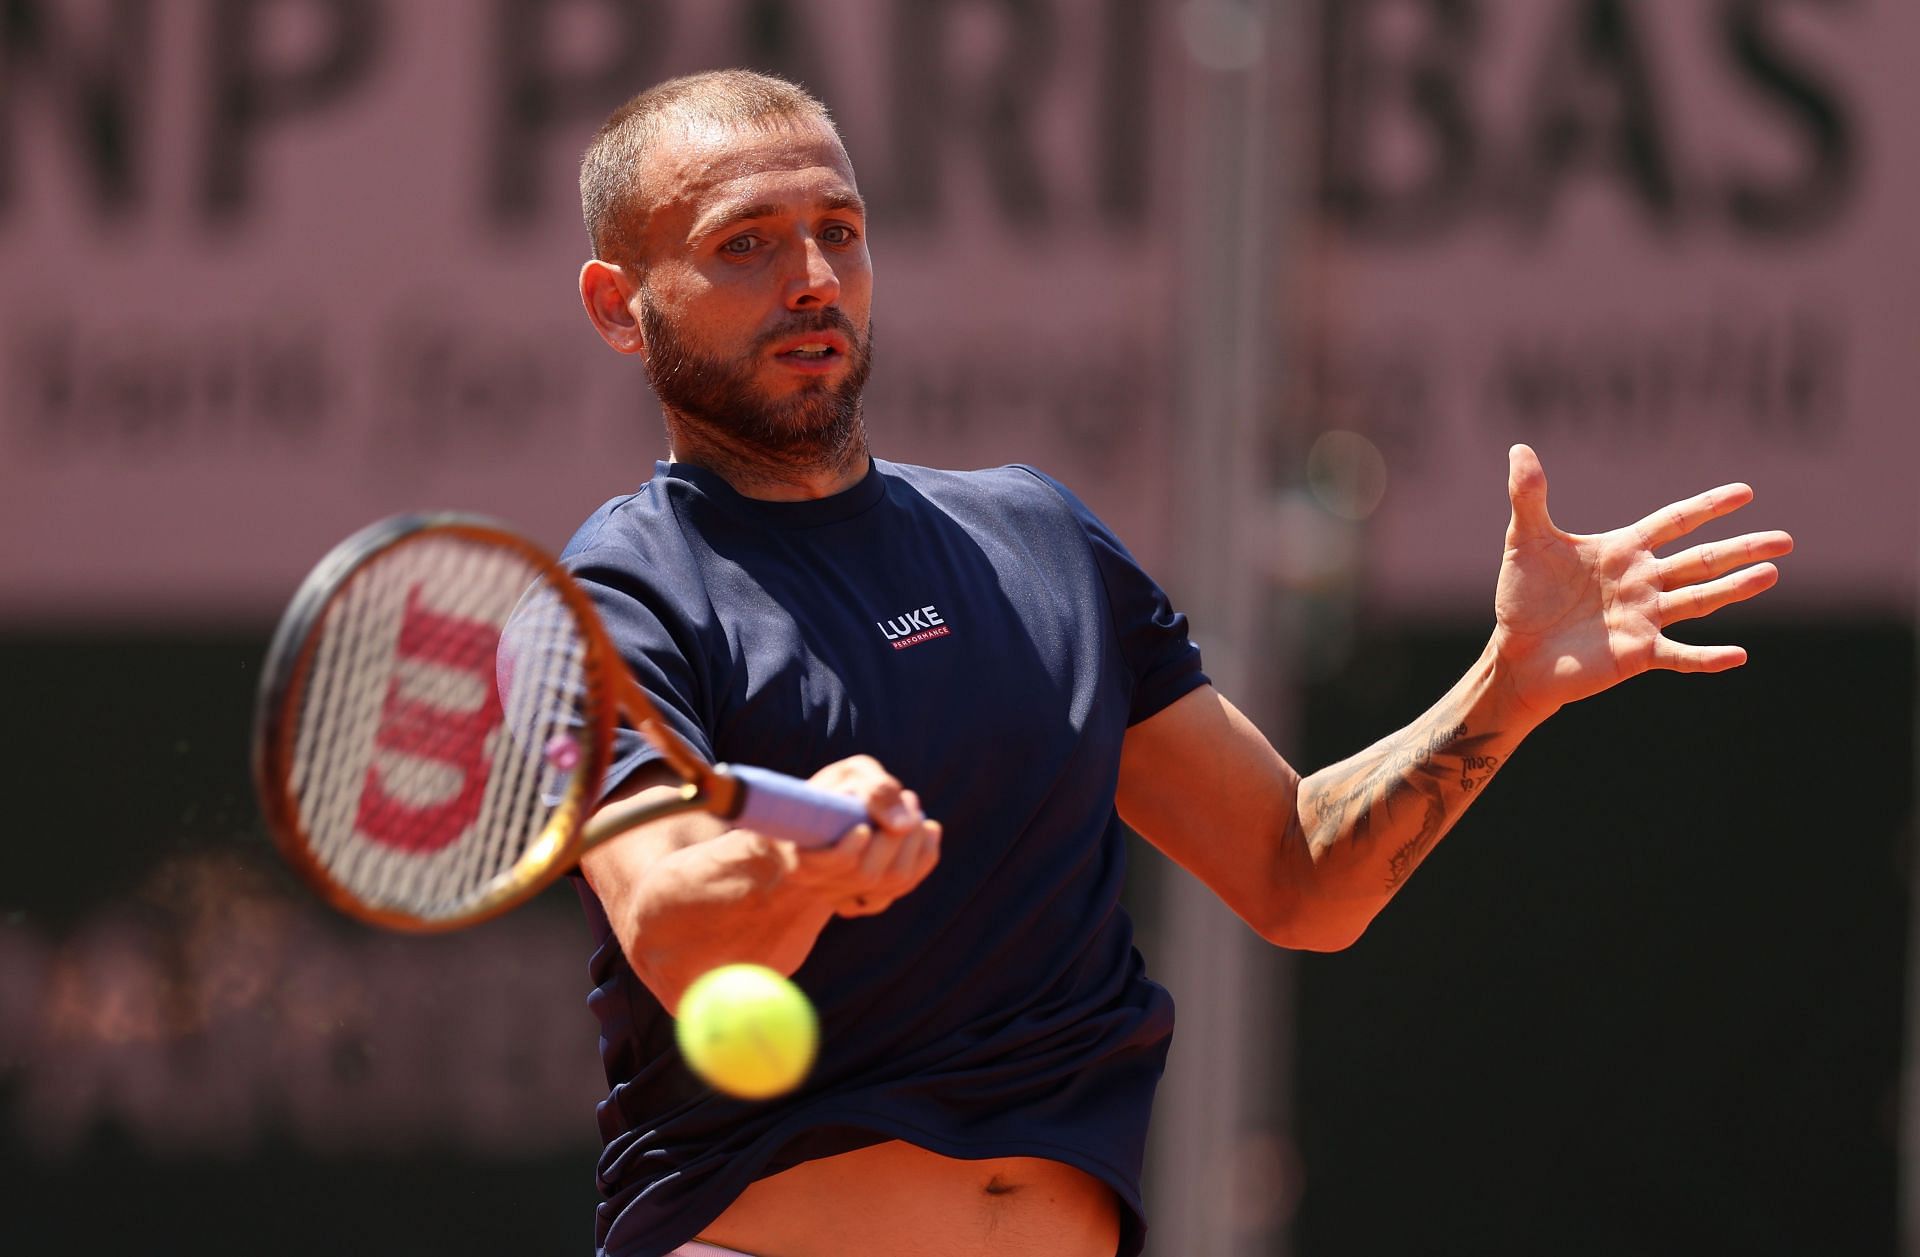 Dan Evans in action at the French Open